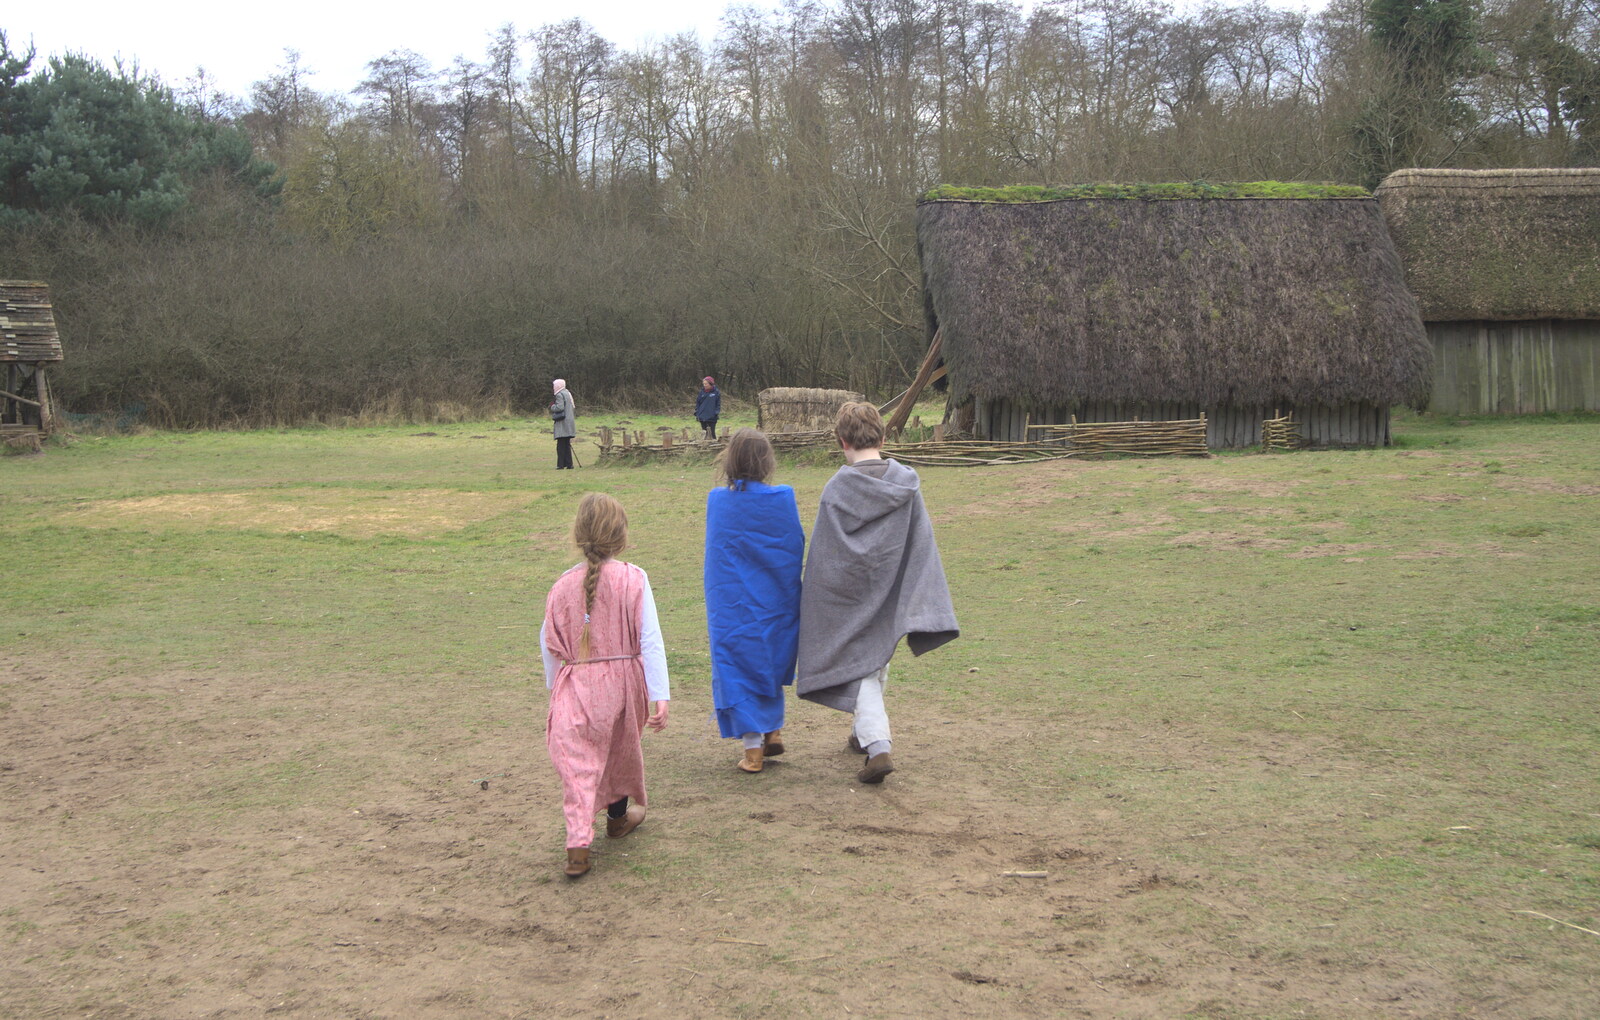 Some children run around pretending to be Saxon from An Anglo-Saxon Village, West Stow, Suffolk - 19th February 2017